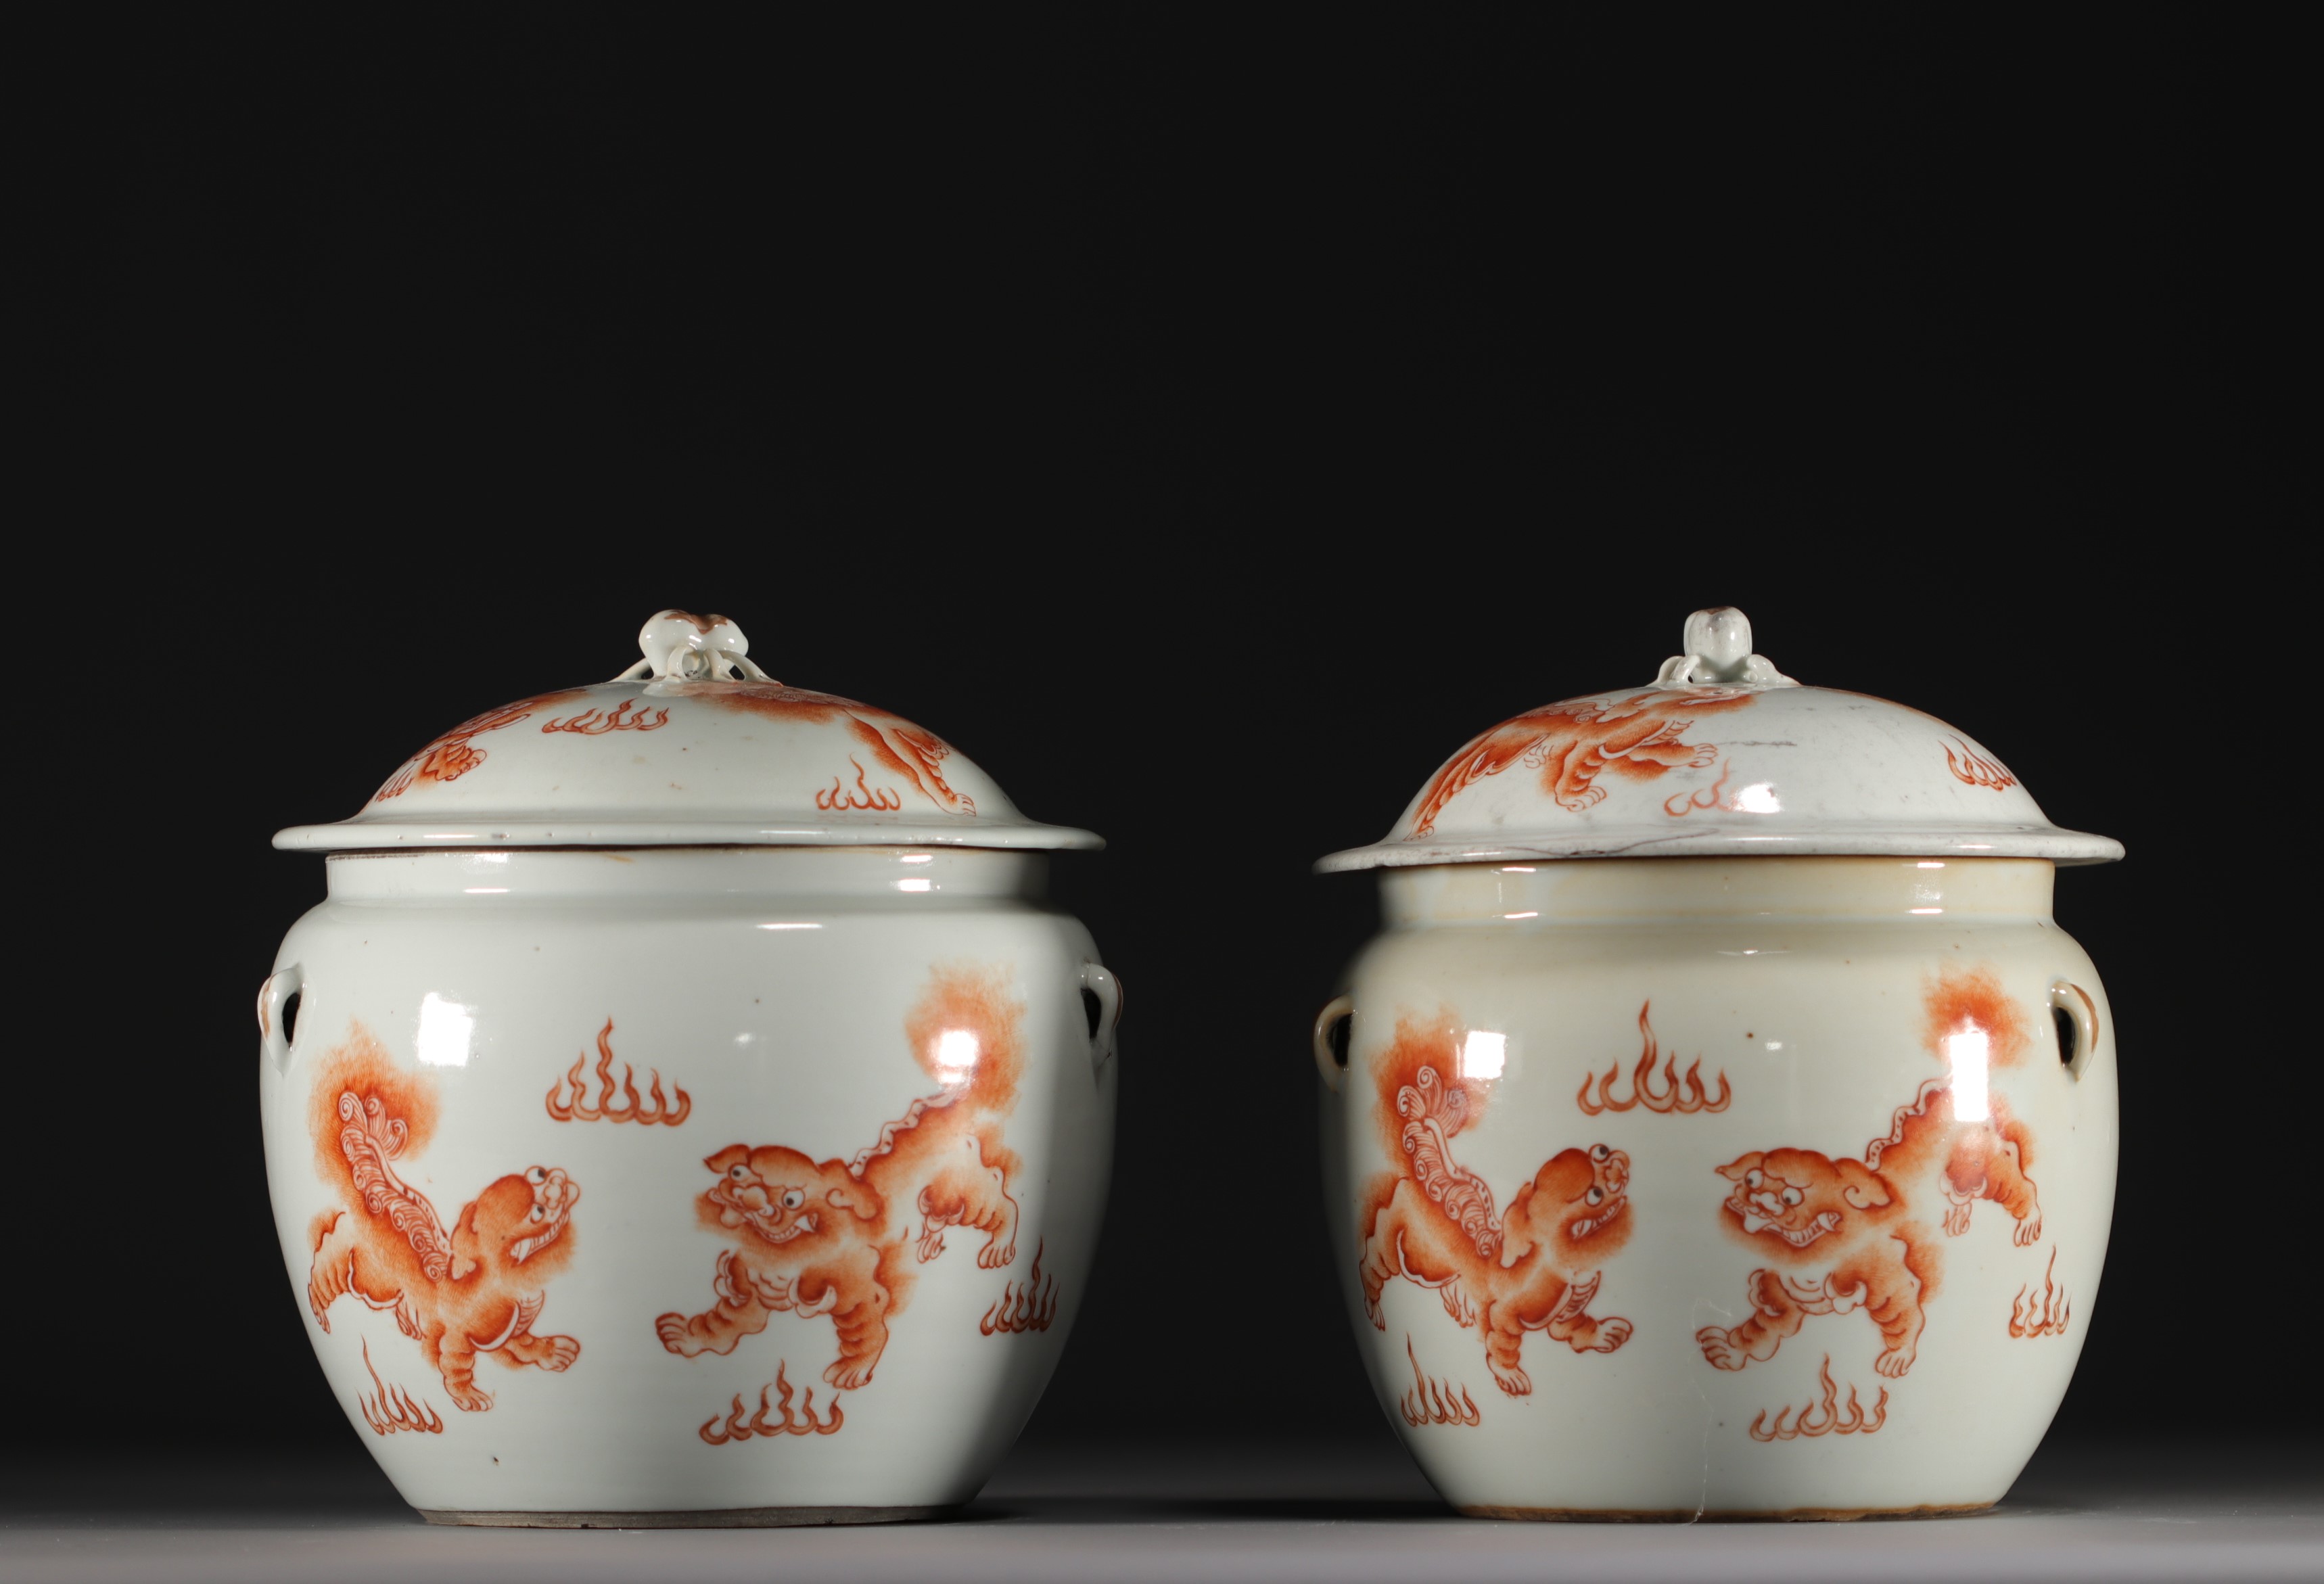 China - Pair of covered terrines decorated with iron-red lions, 19th century. - Image 2 of 4